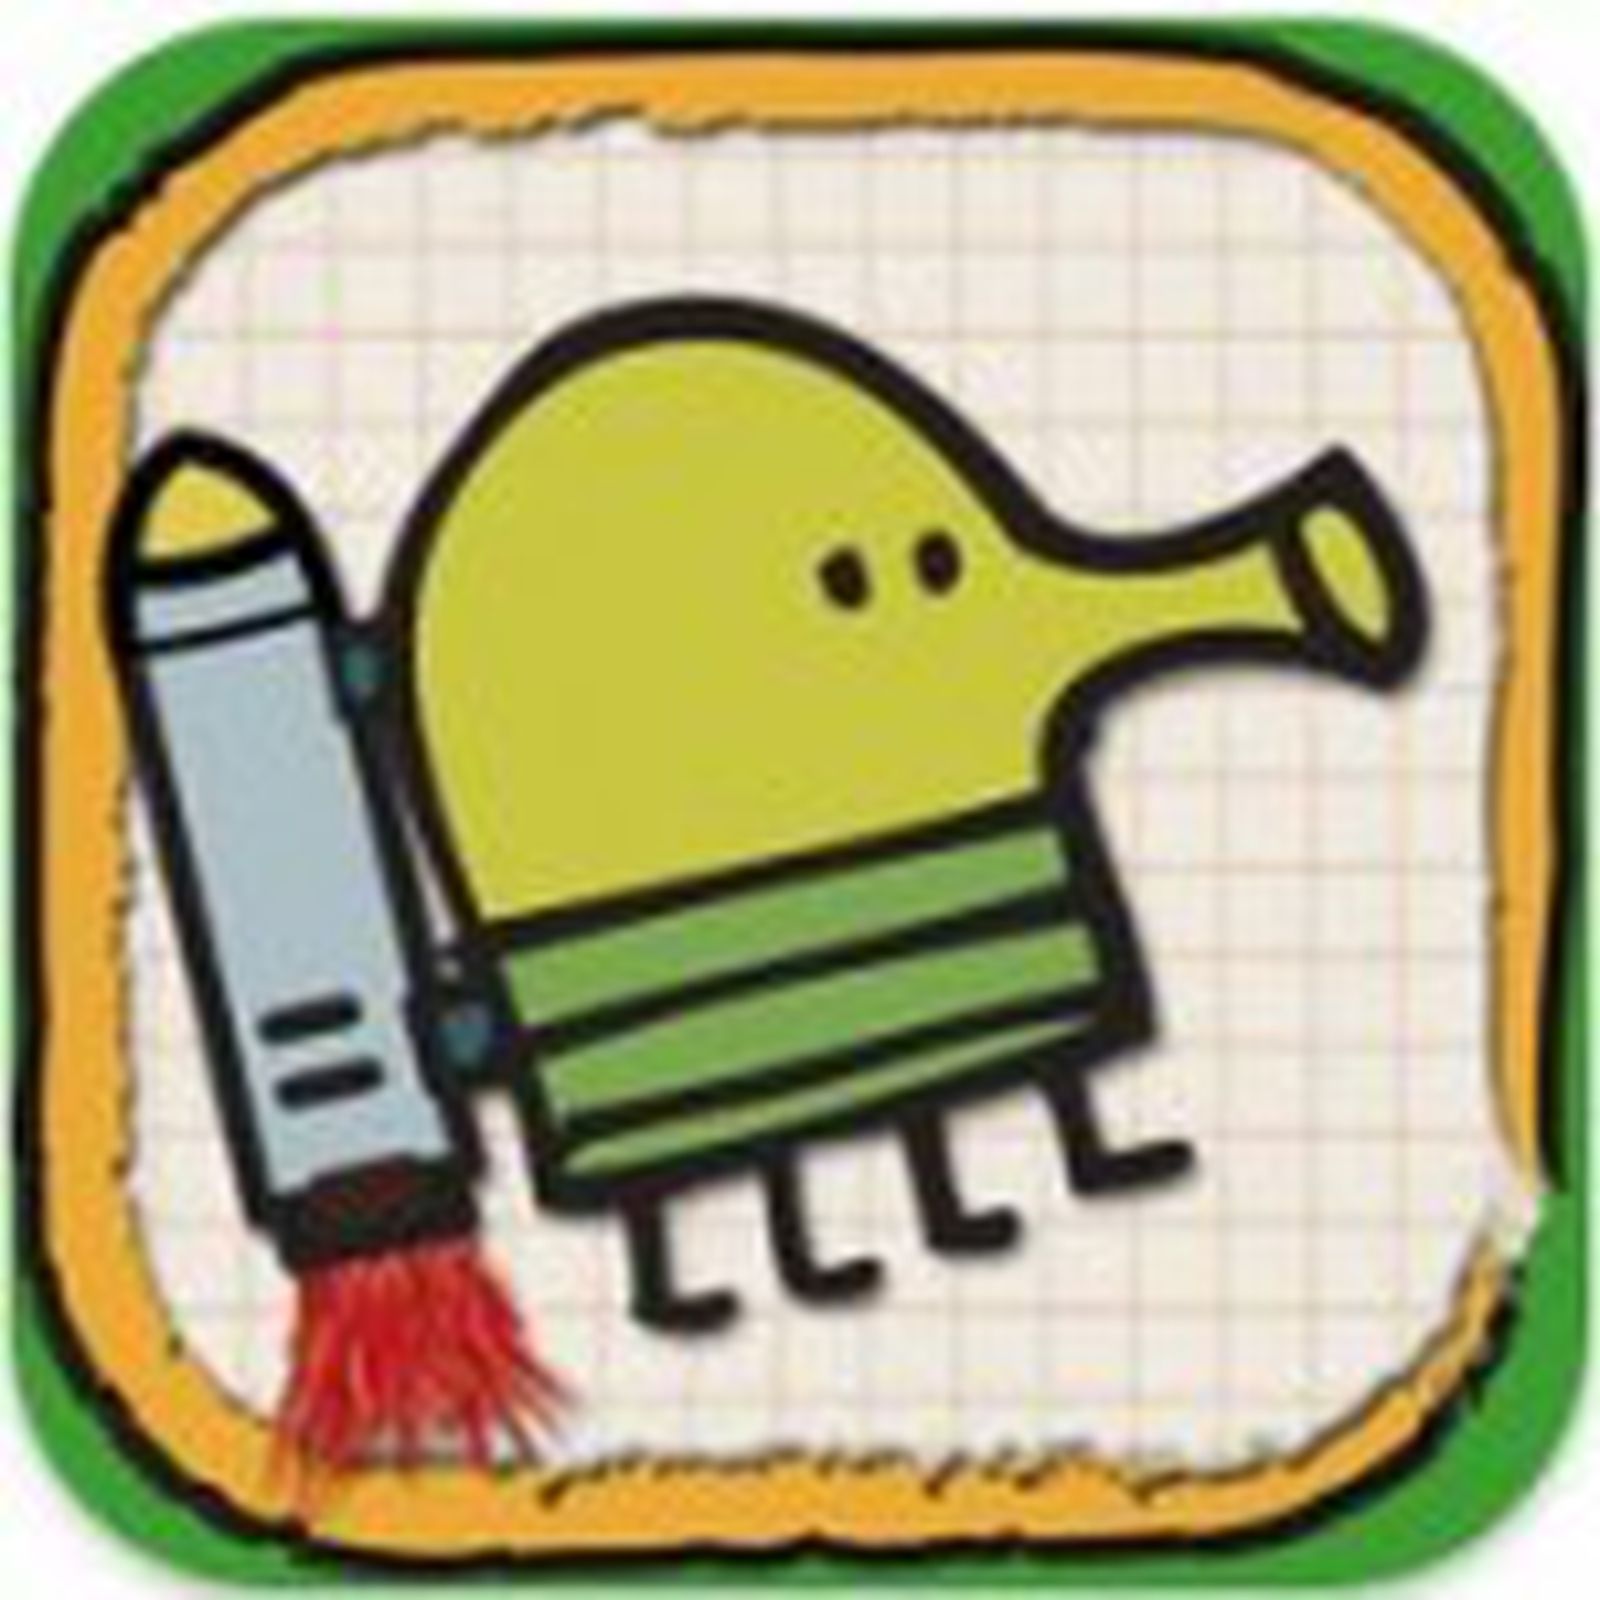 Doodle Jump for iPad' Review – It's 'Doodle Jump' For Your iPad